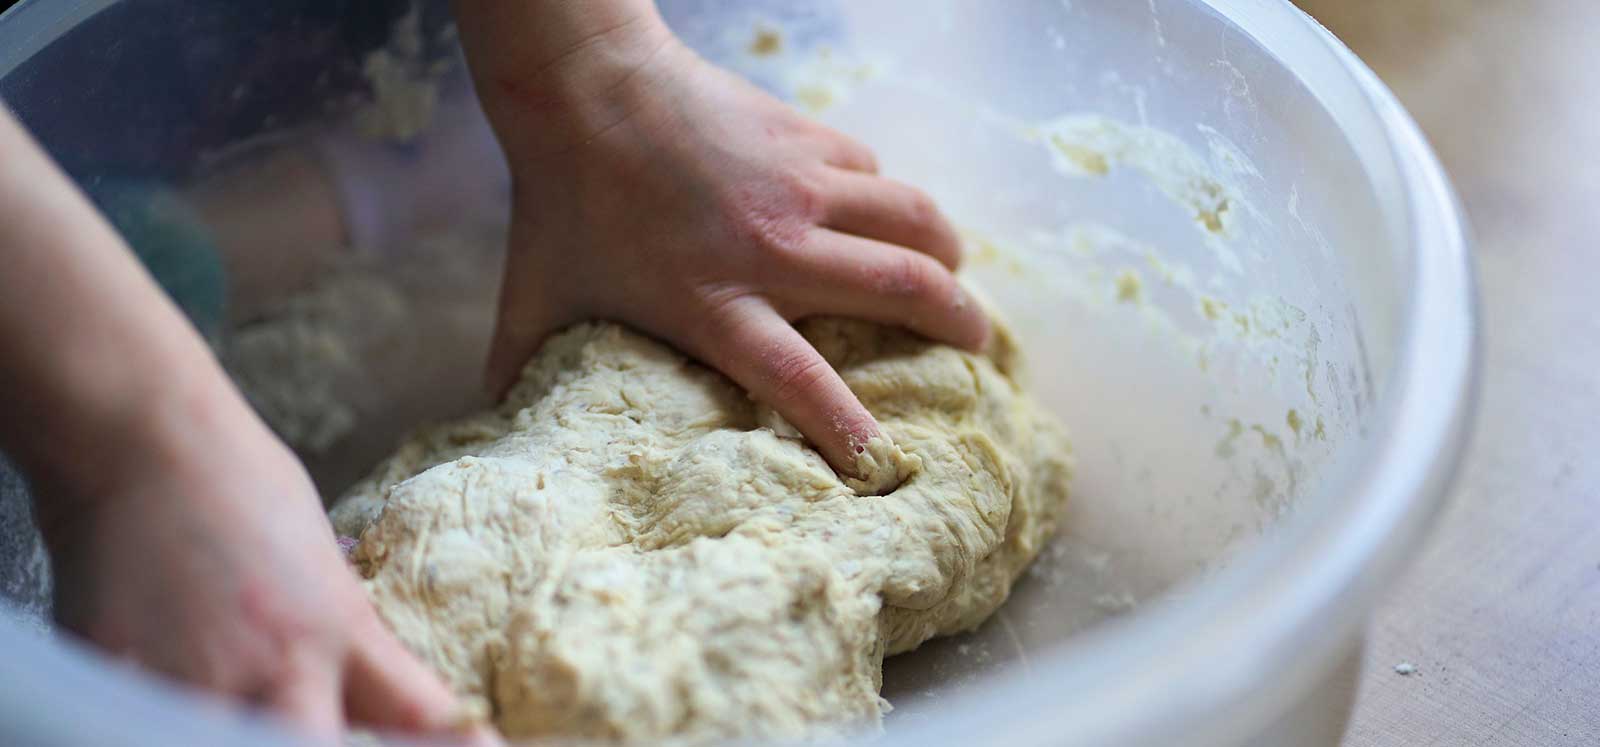 close up of a bowl, hand and dough